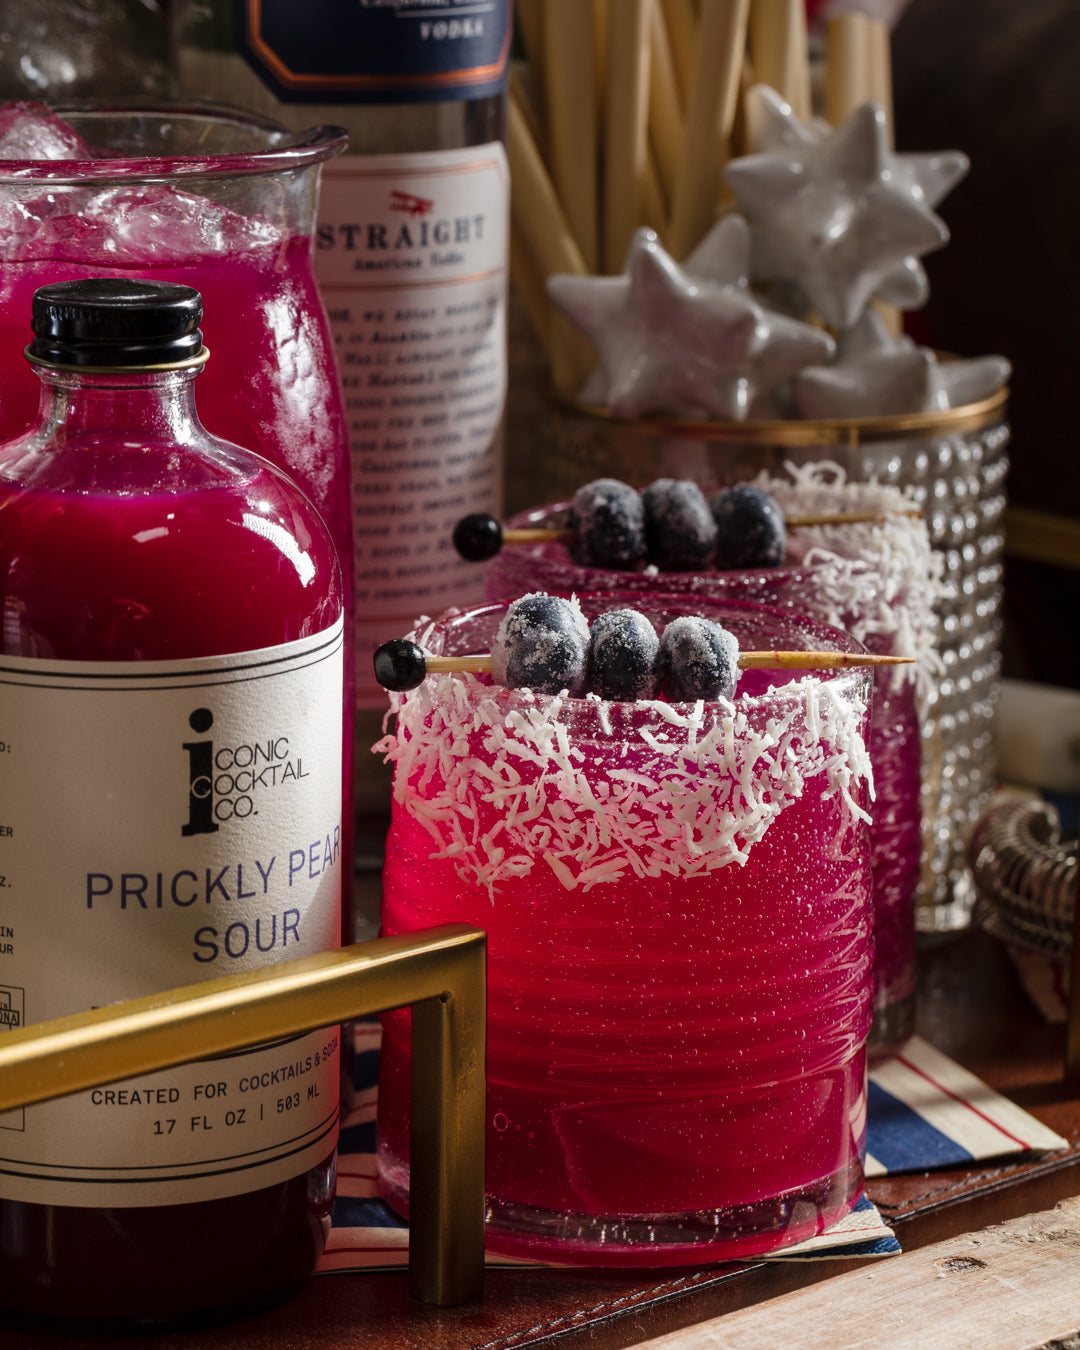 Celebrate Independence Day with the "Born to Sparkle" Cocktail